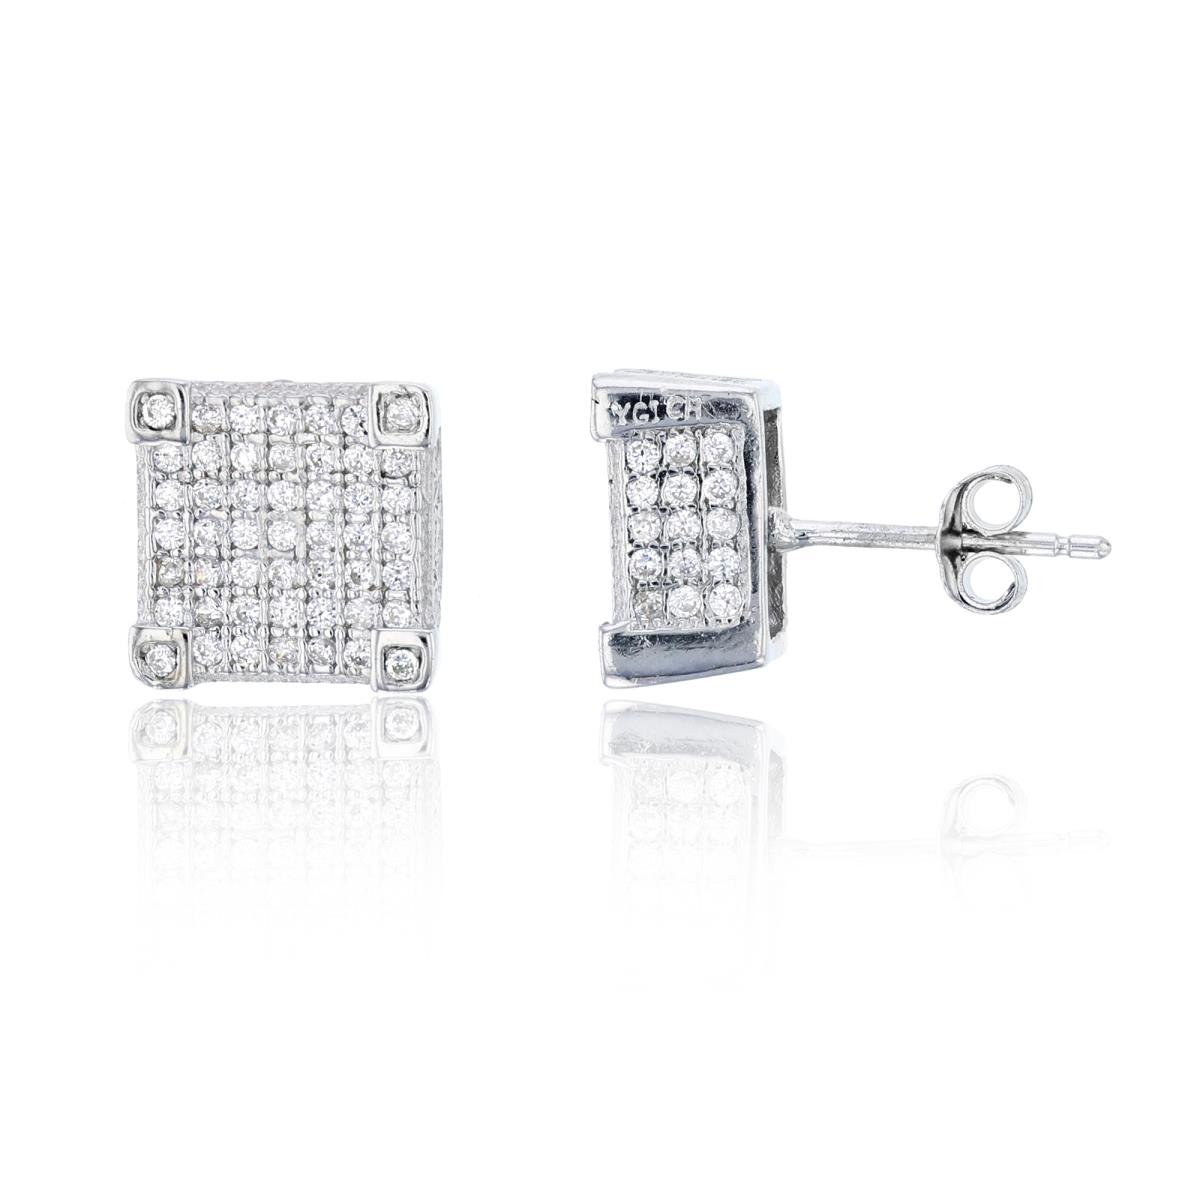 Sterling Silver Rhodium 9.55x9.55mm 3D Square Stud Earring